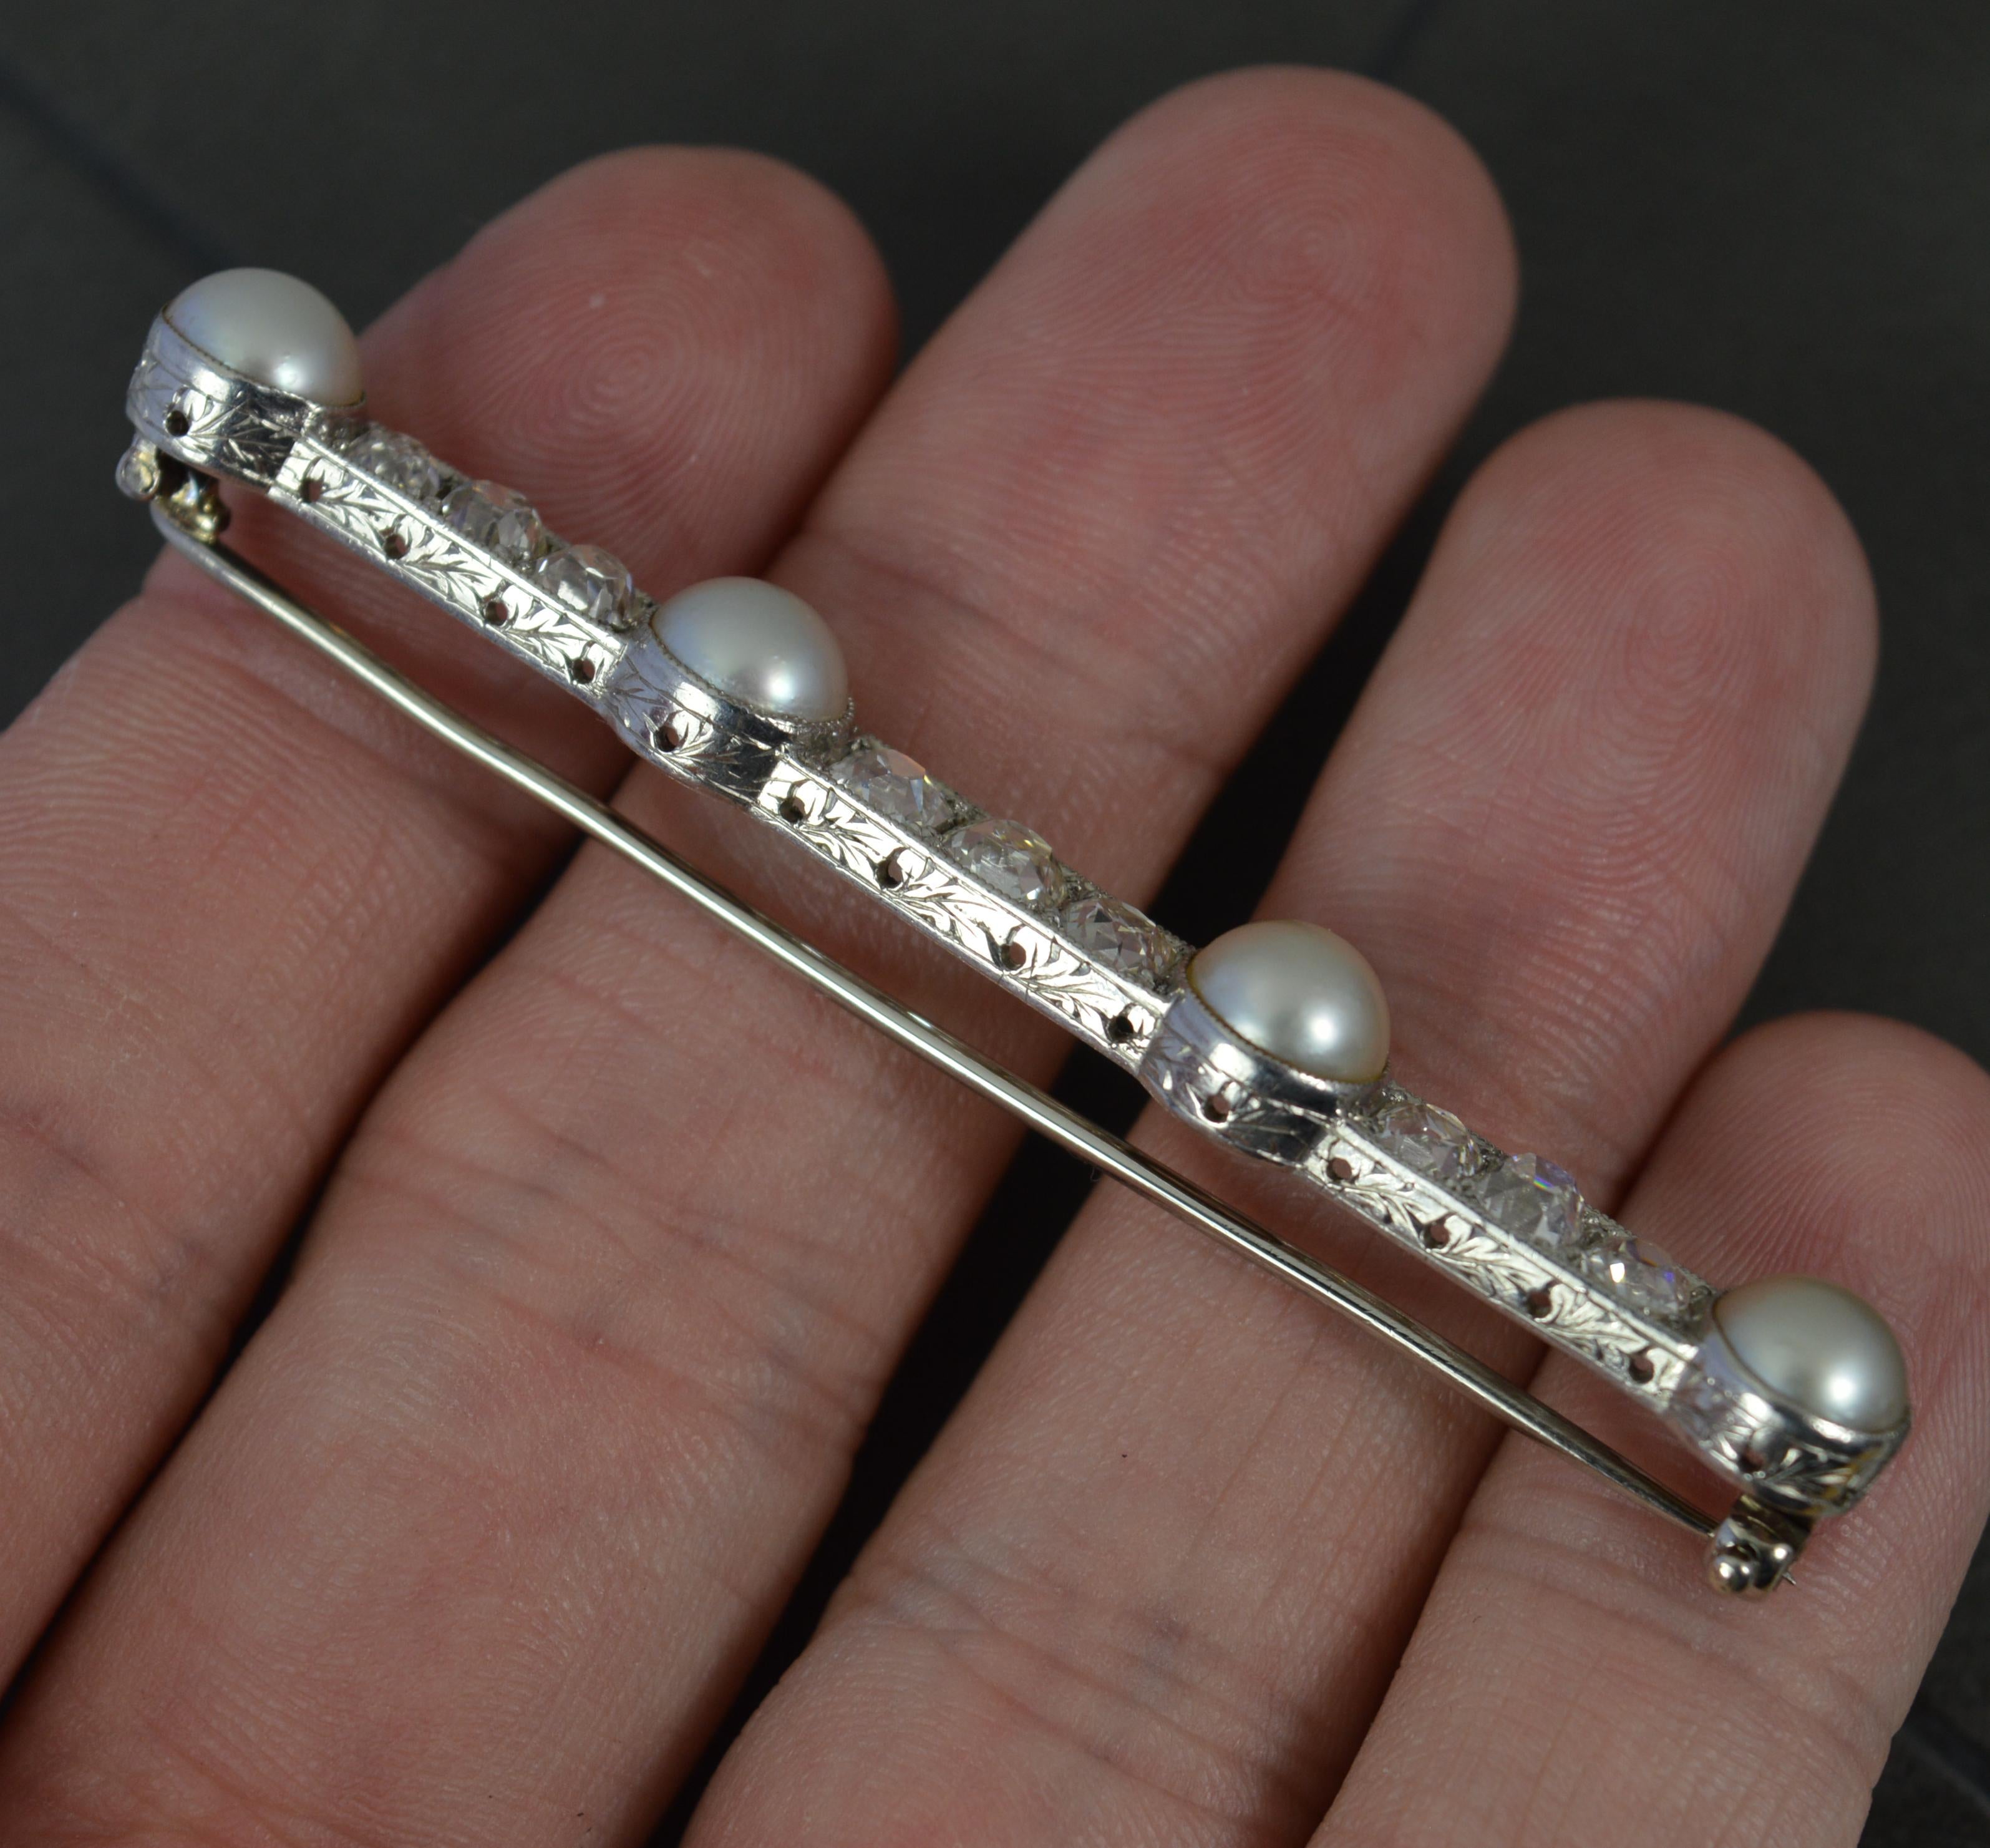 A stunning antique bar brooch, circa 1920.
Solid platinum example with fine engraving to top and bottom of the brooch.
Set with four large pearls with trios of old cushin cut diamonds in between each. The nine diamonds total 2.3-2.5 carats total. Vs